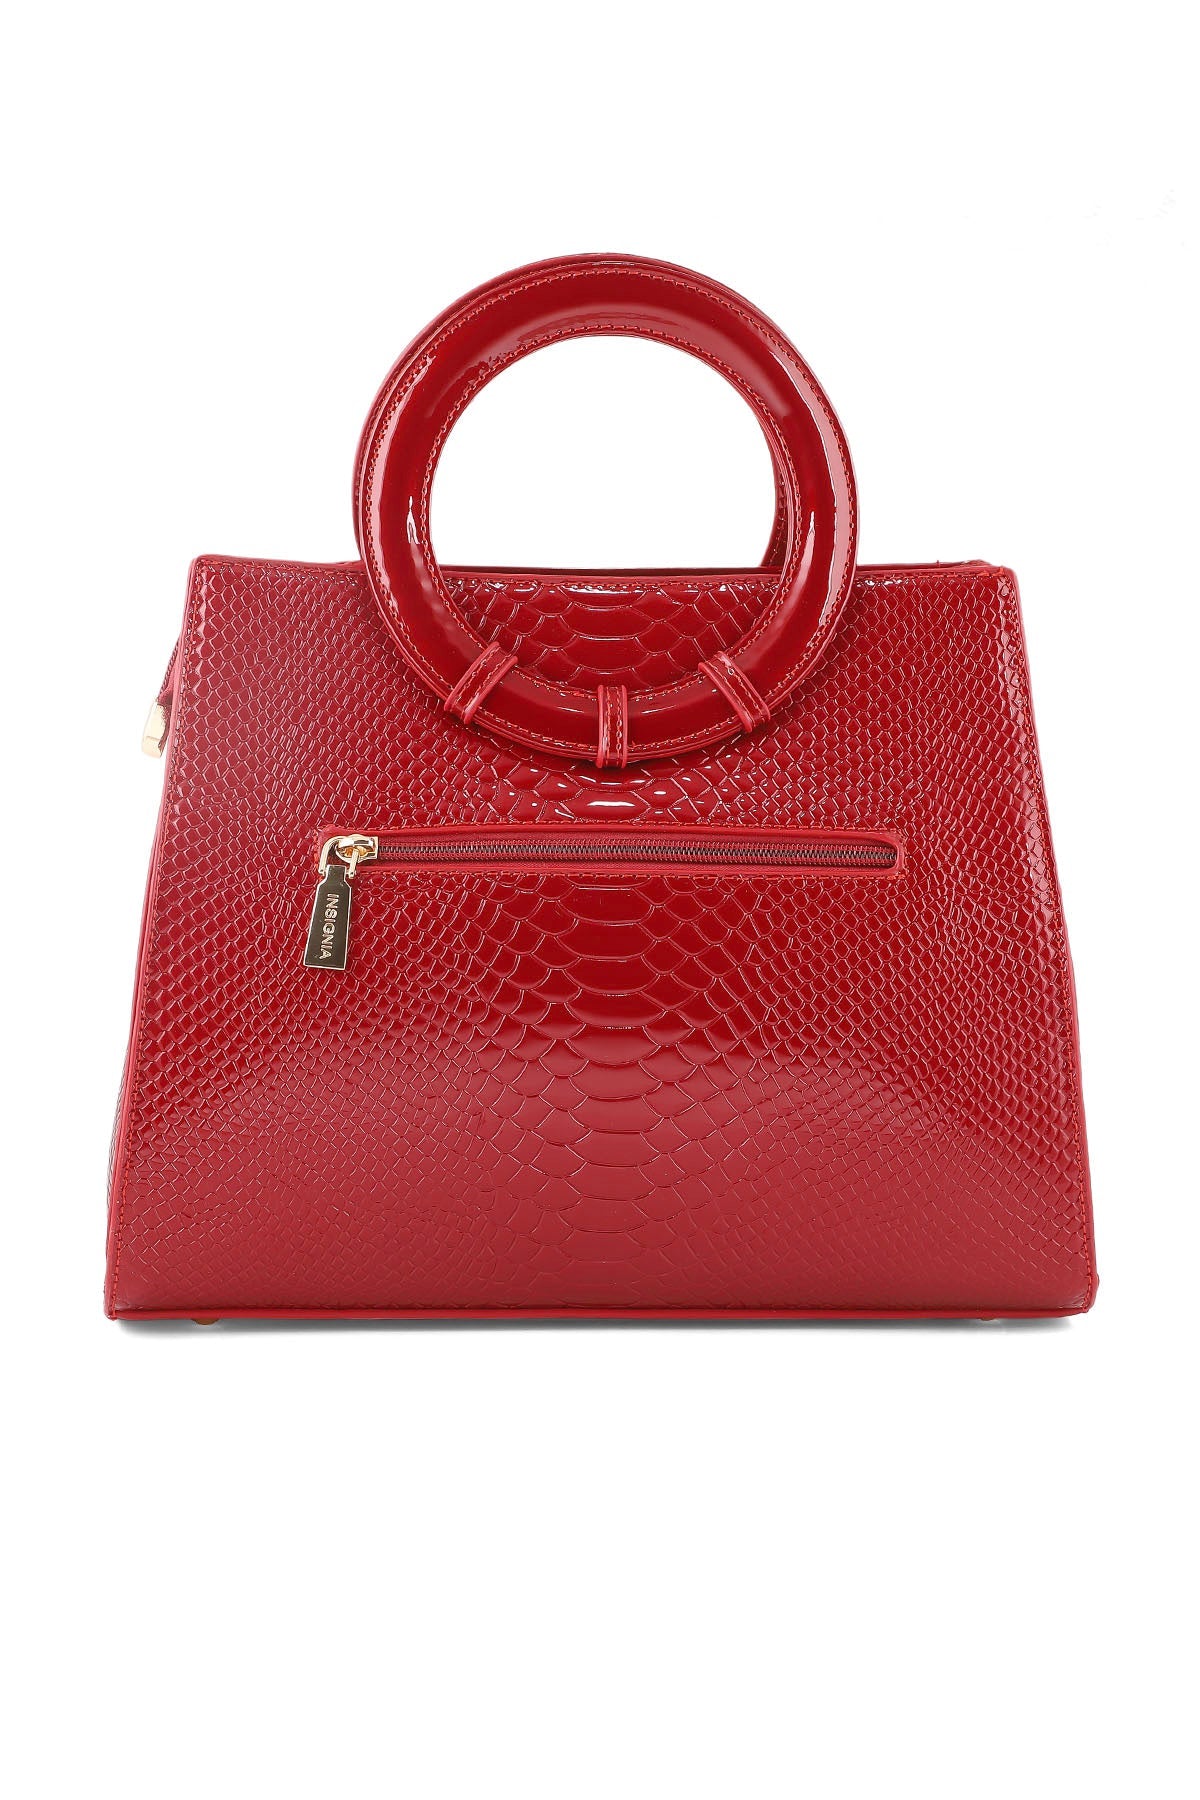 Top Handle Hand Bags B14996-Red